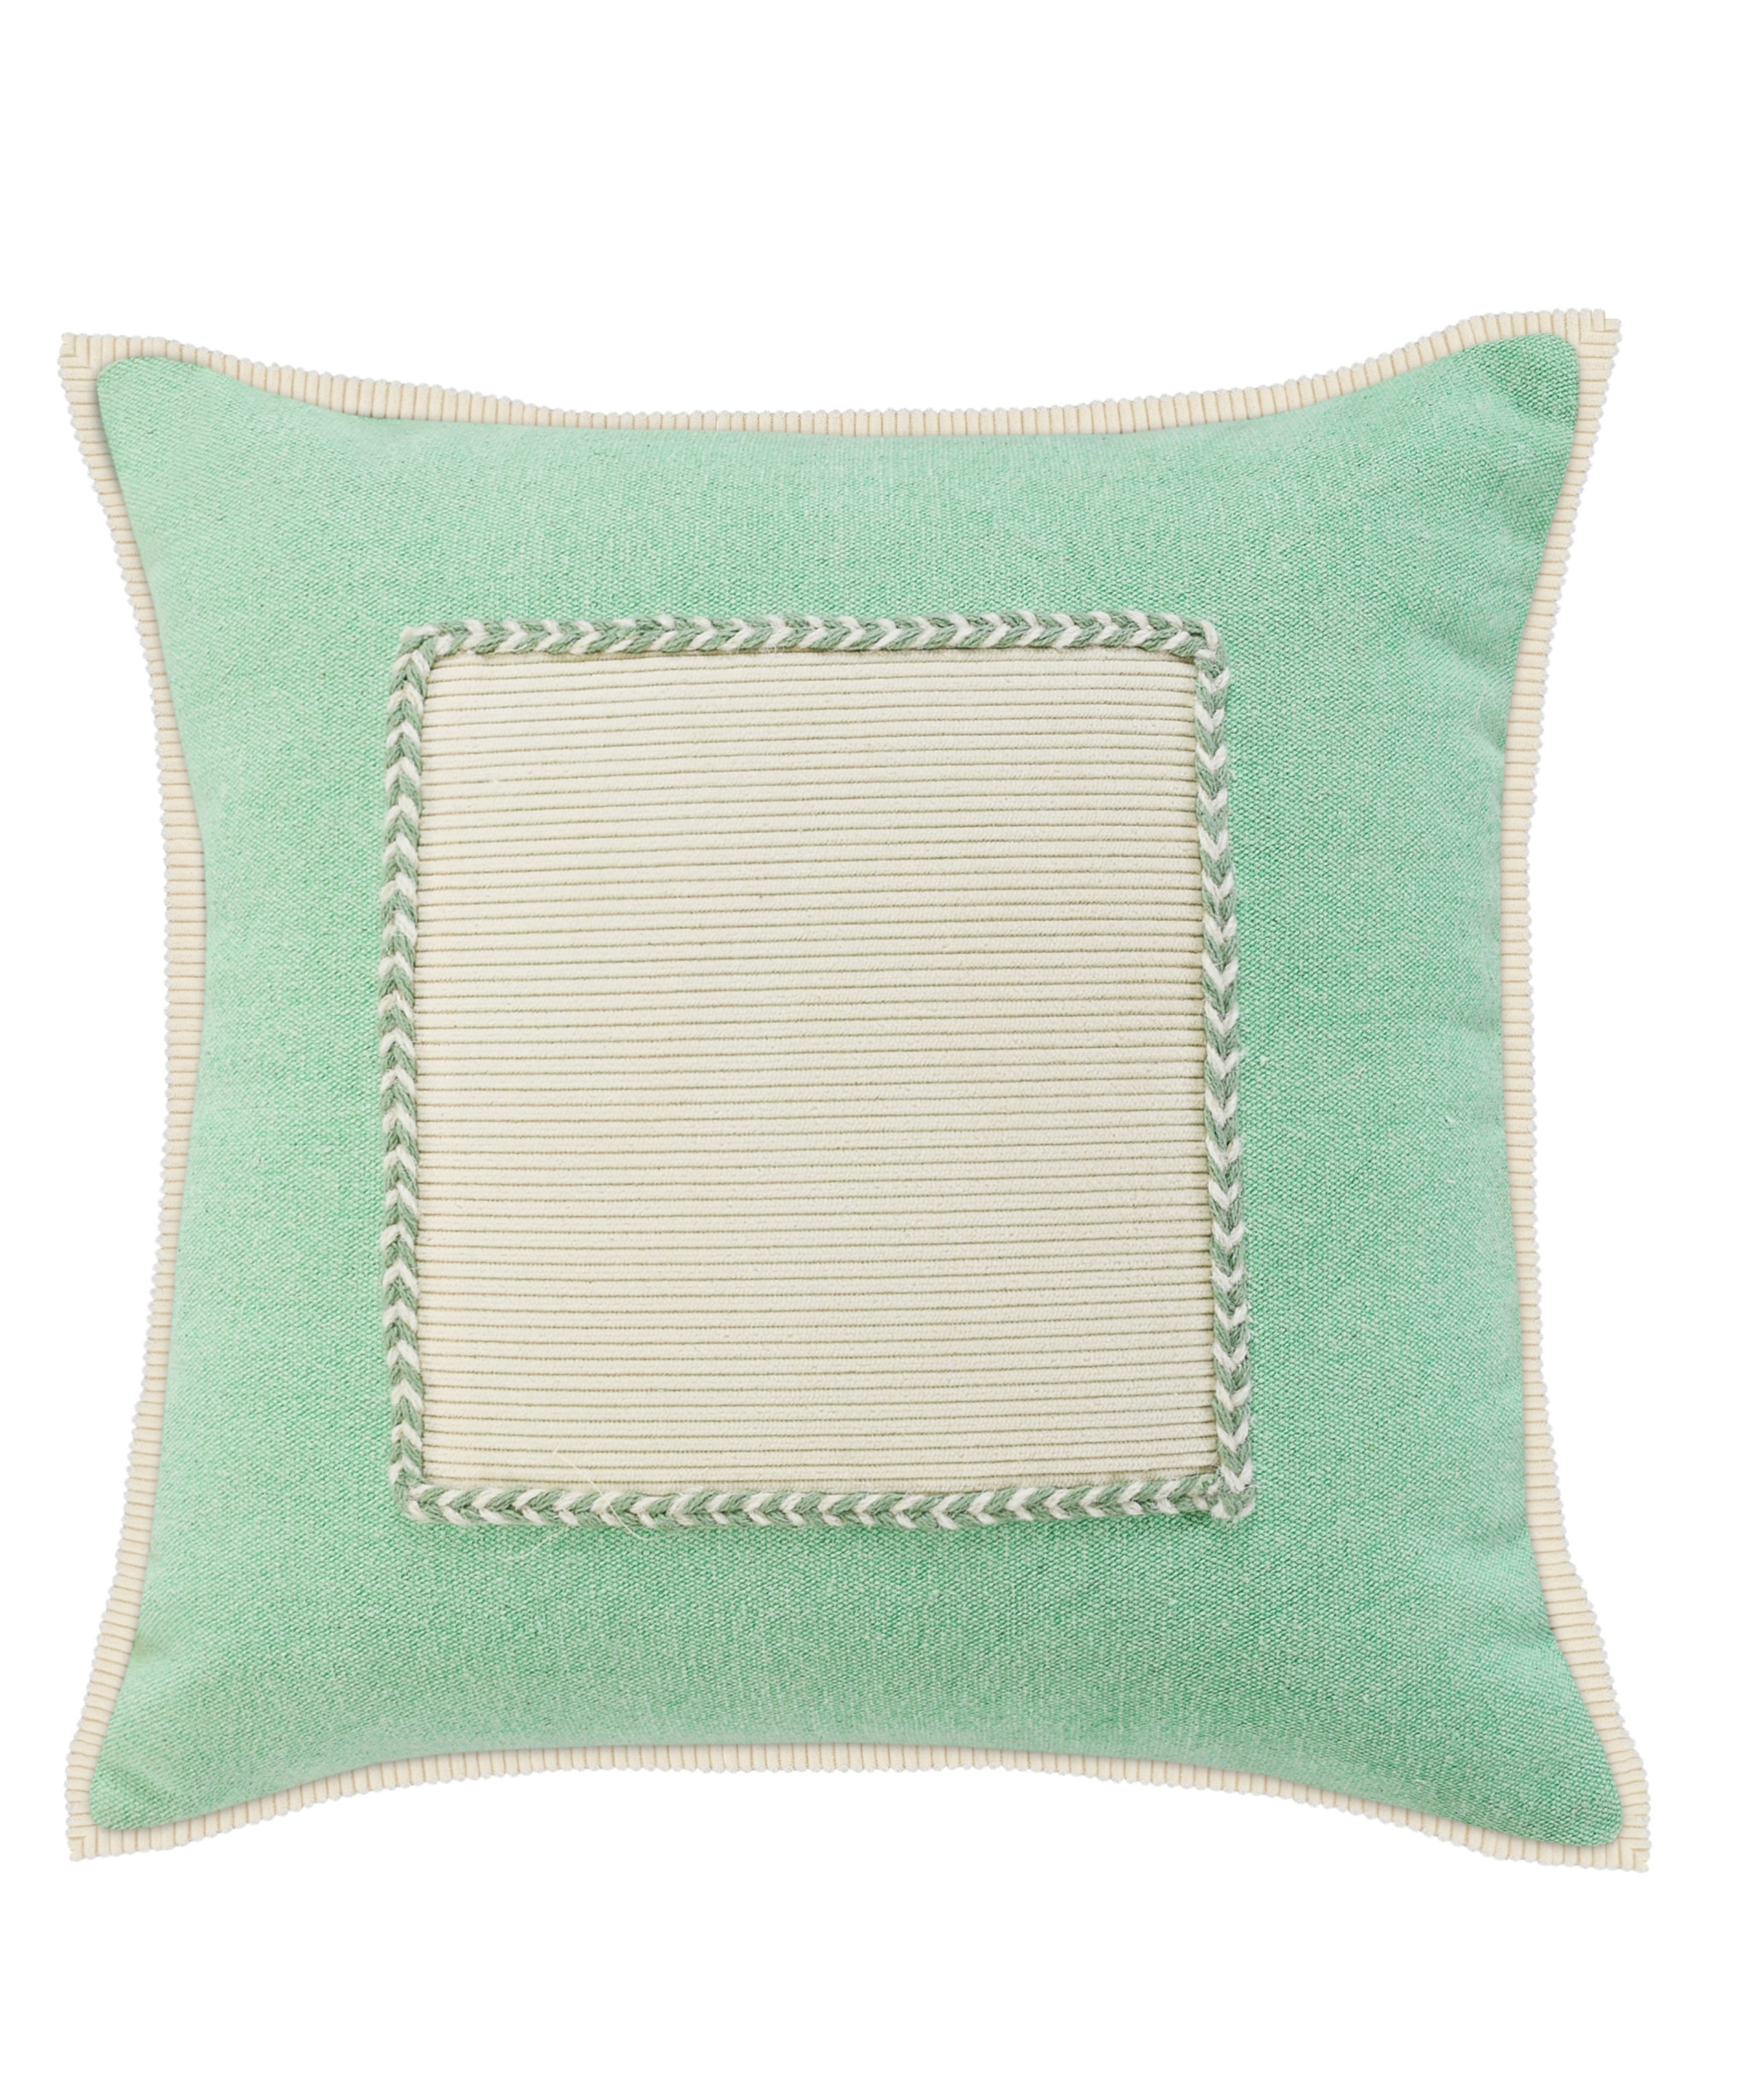 20" X 20" Pastel Green And Cream 100% Cotton Zippered Pillow-517125-1